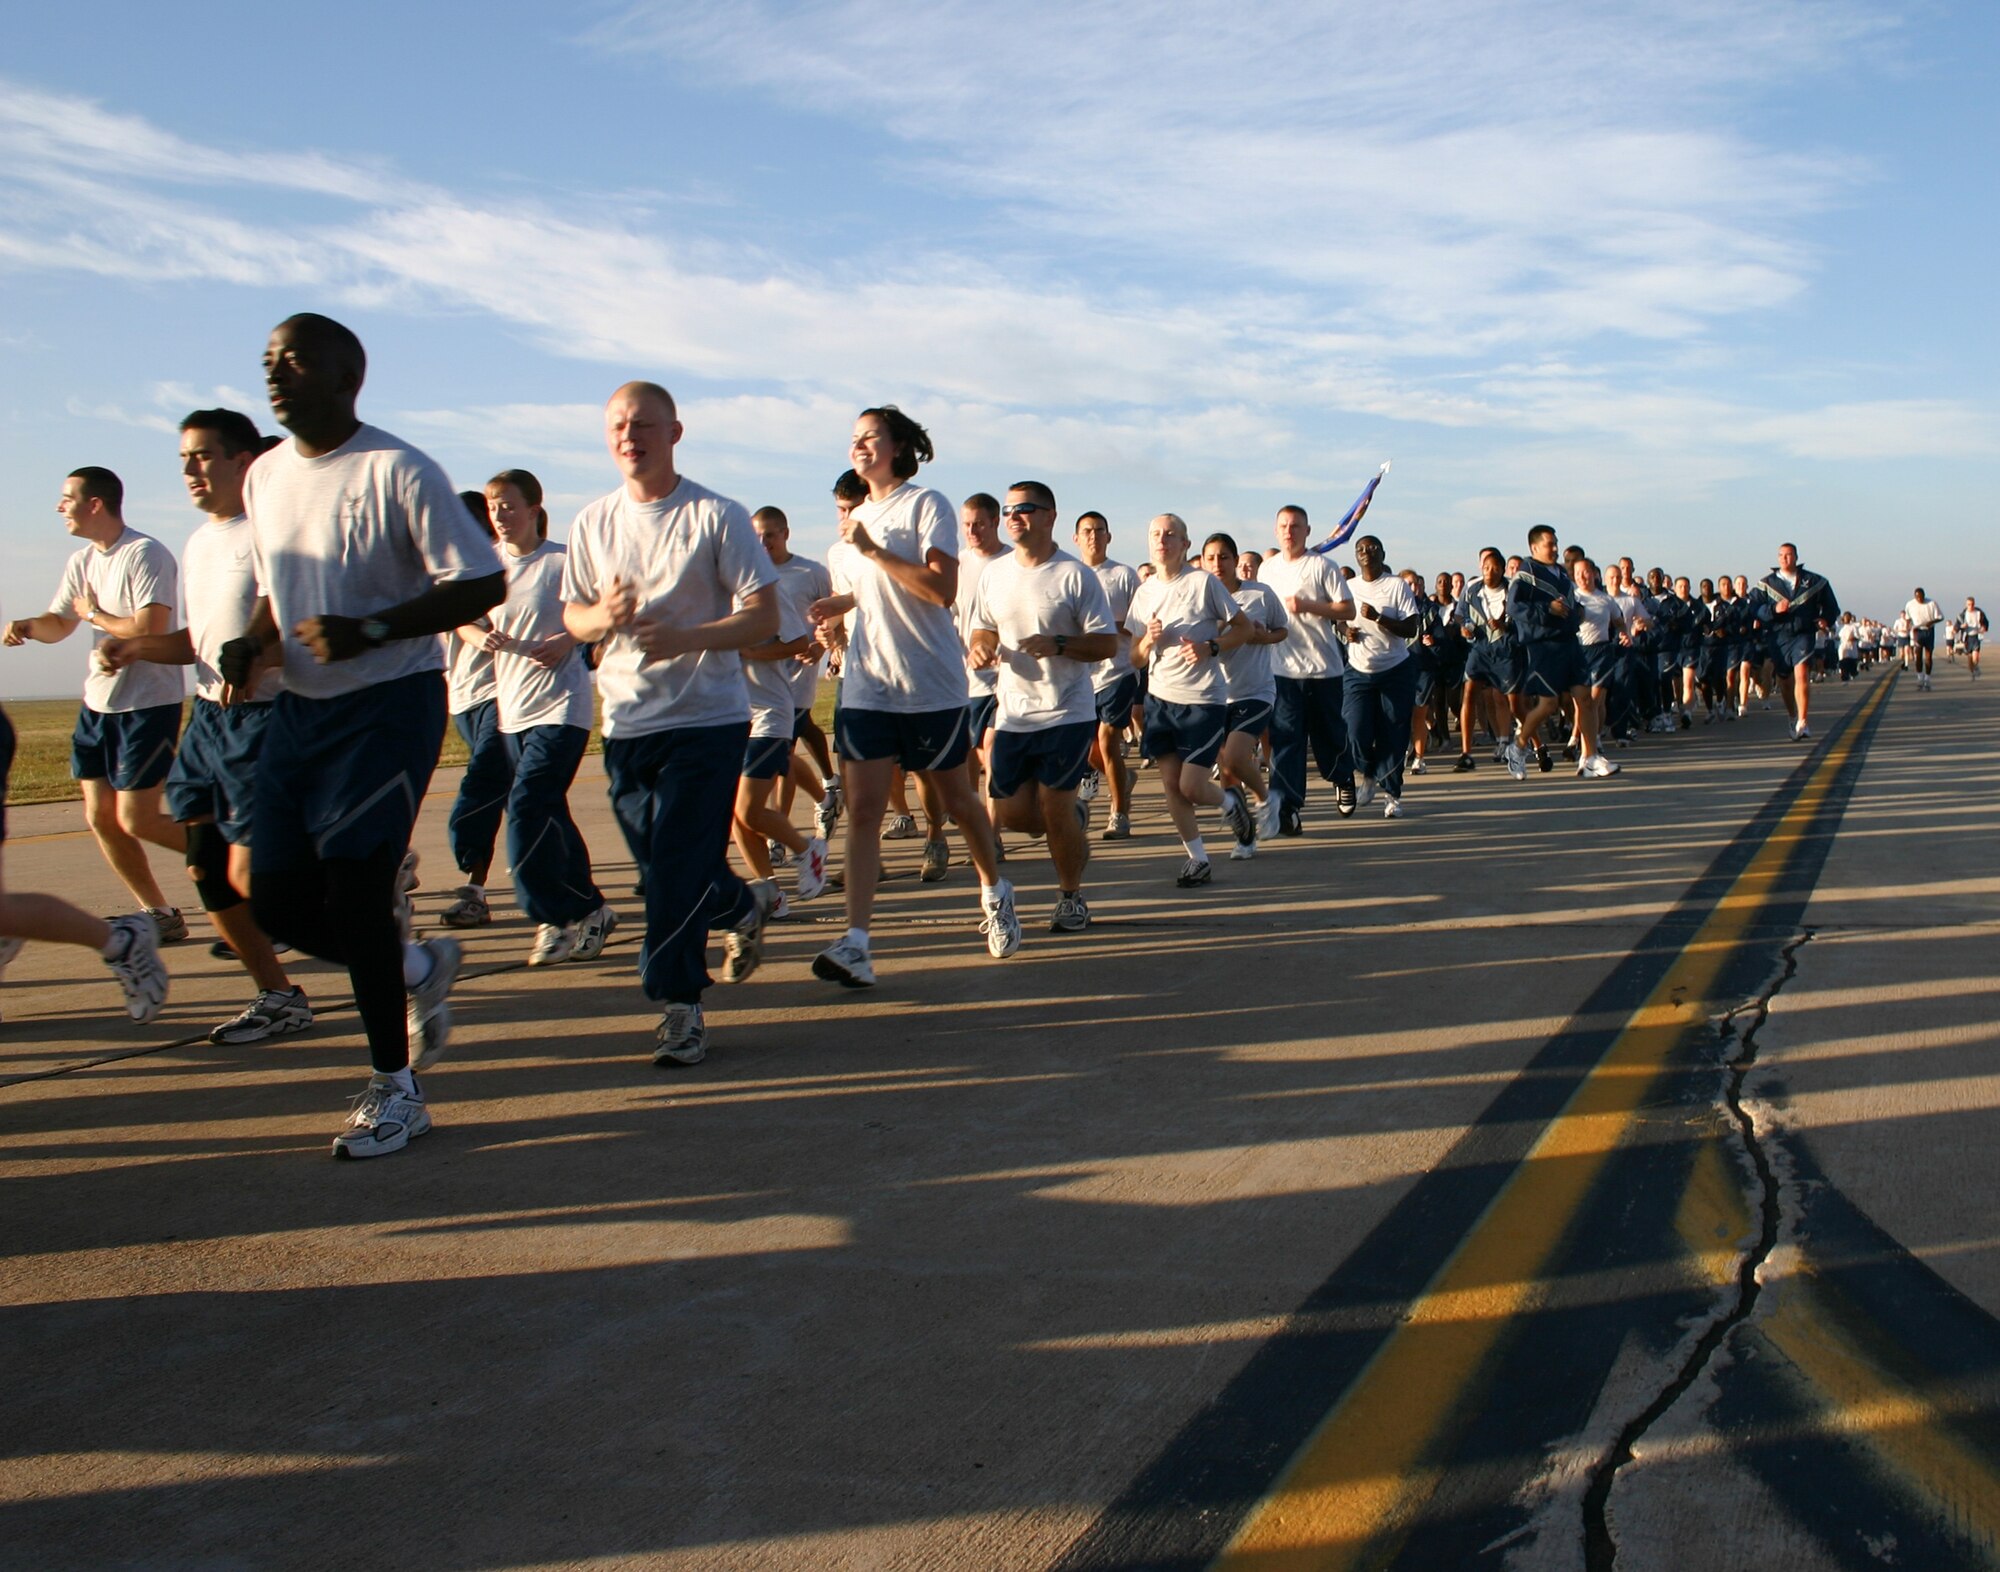 CANNON AIR FORCE BASE, N.M. -- Airmen run during a two-mile commando run on the base flightline Tuesday morning. Airmen from the 27th Special Operations Group and 27th Special Operations Maintenance Group participated in the run. (U.S. Air Force photo by Airman Elliott Sprehe)